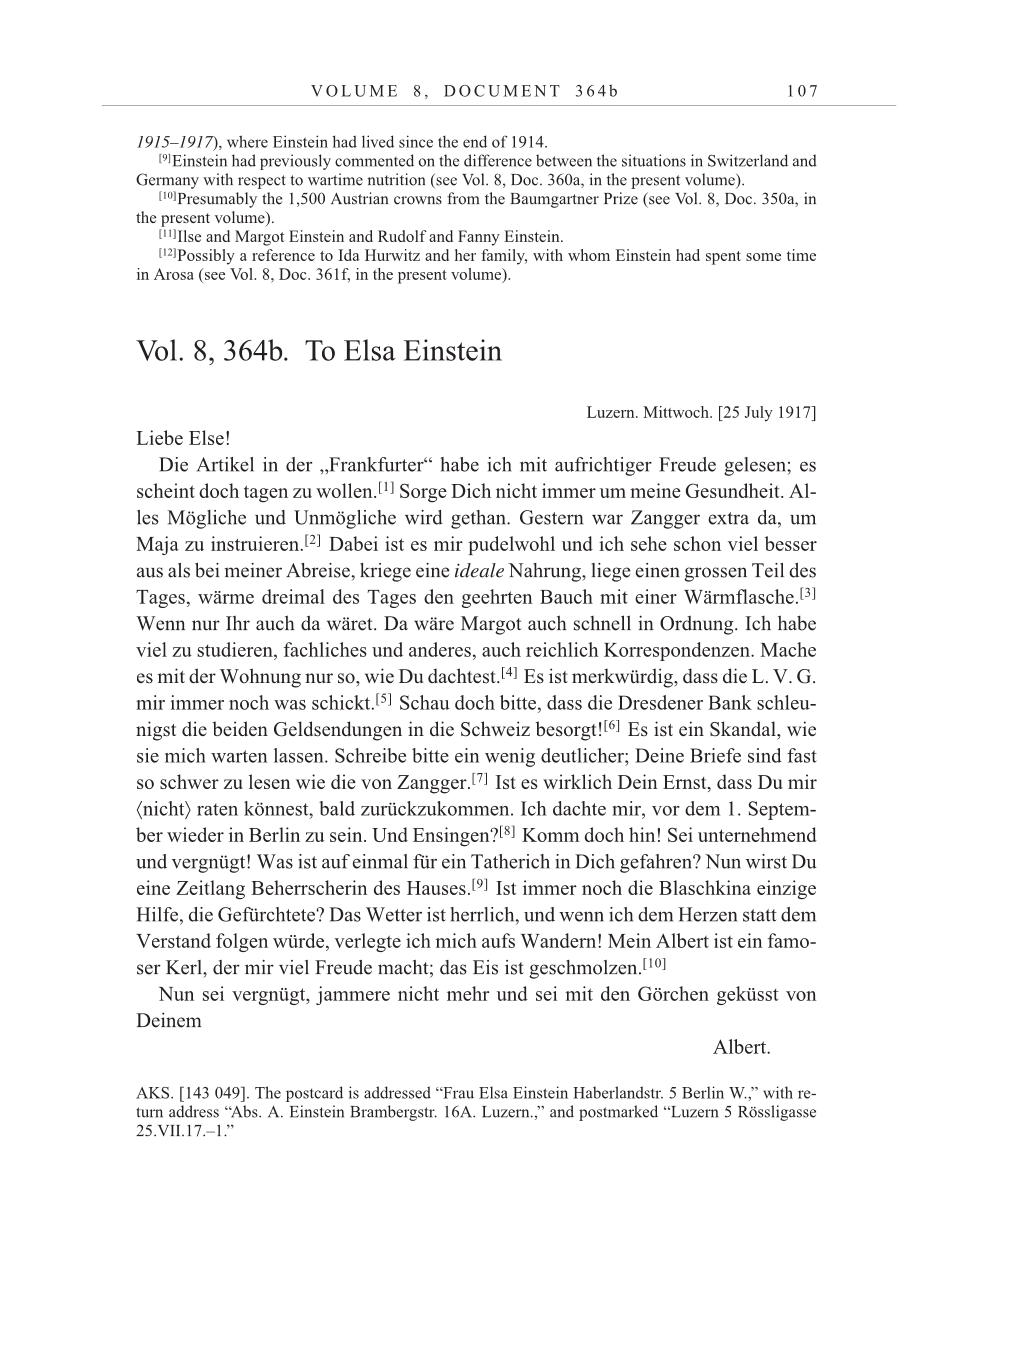 Volume 10: The Berlin Years: Correspondence May-December 1920 / Supplementary Correspondence 1909-1920 page 107